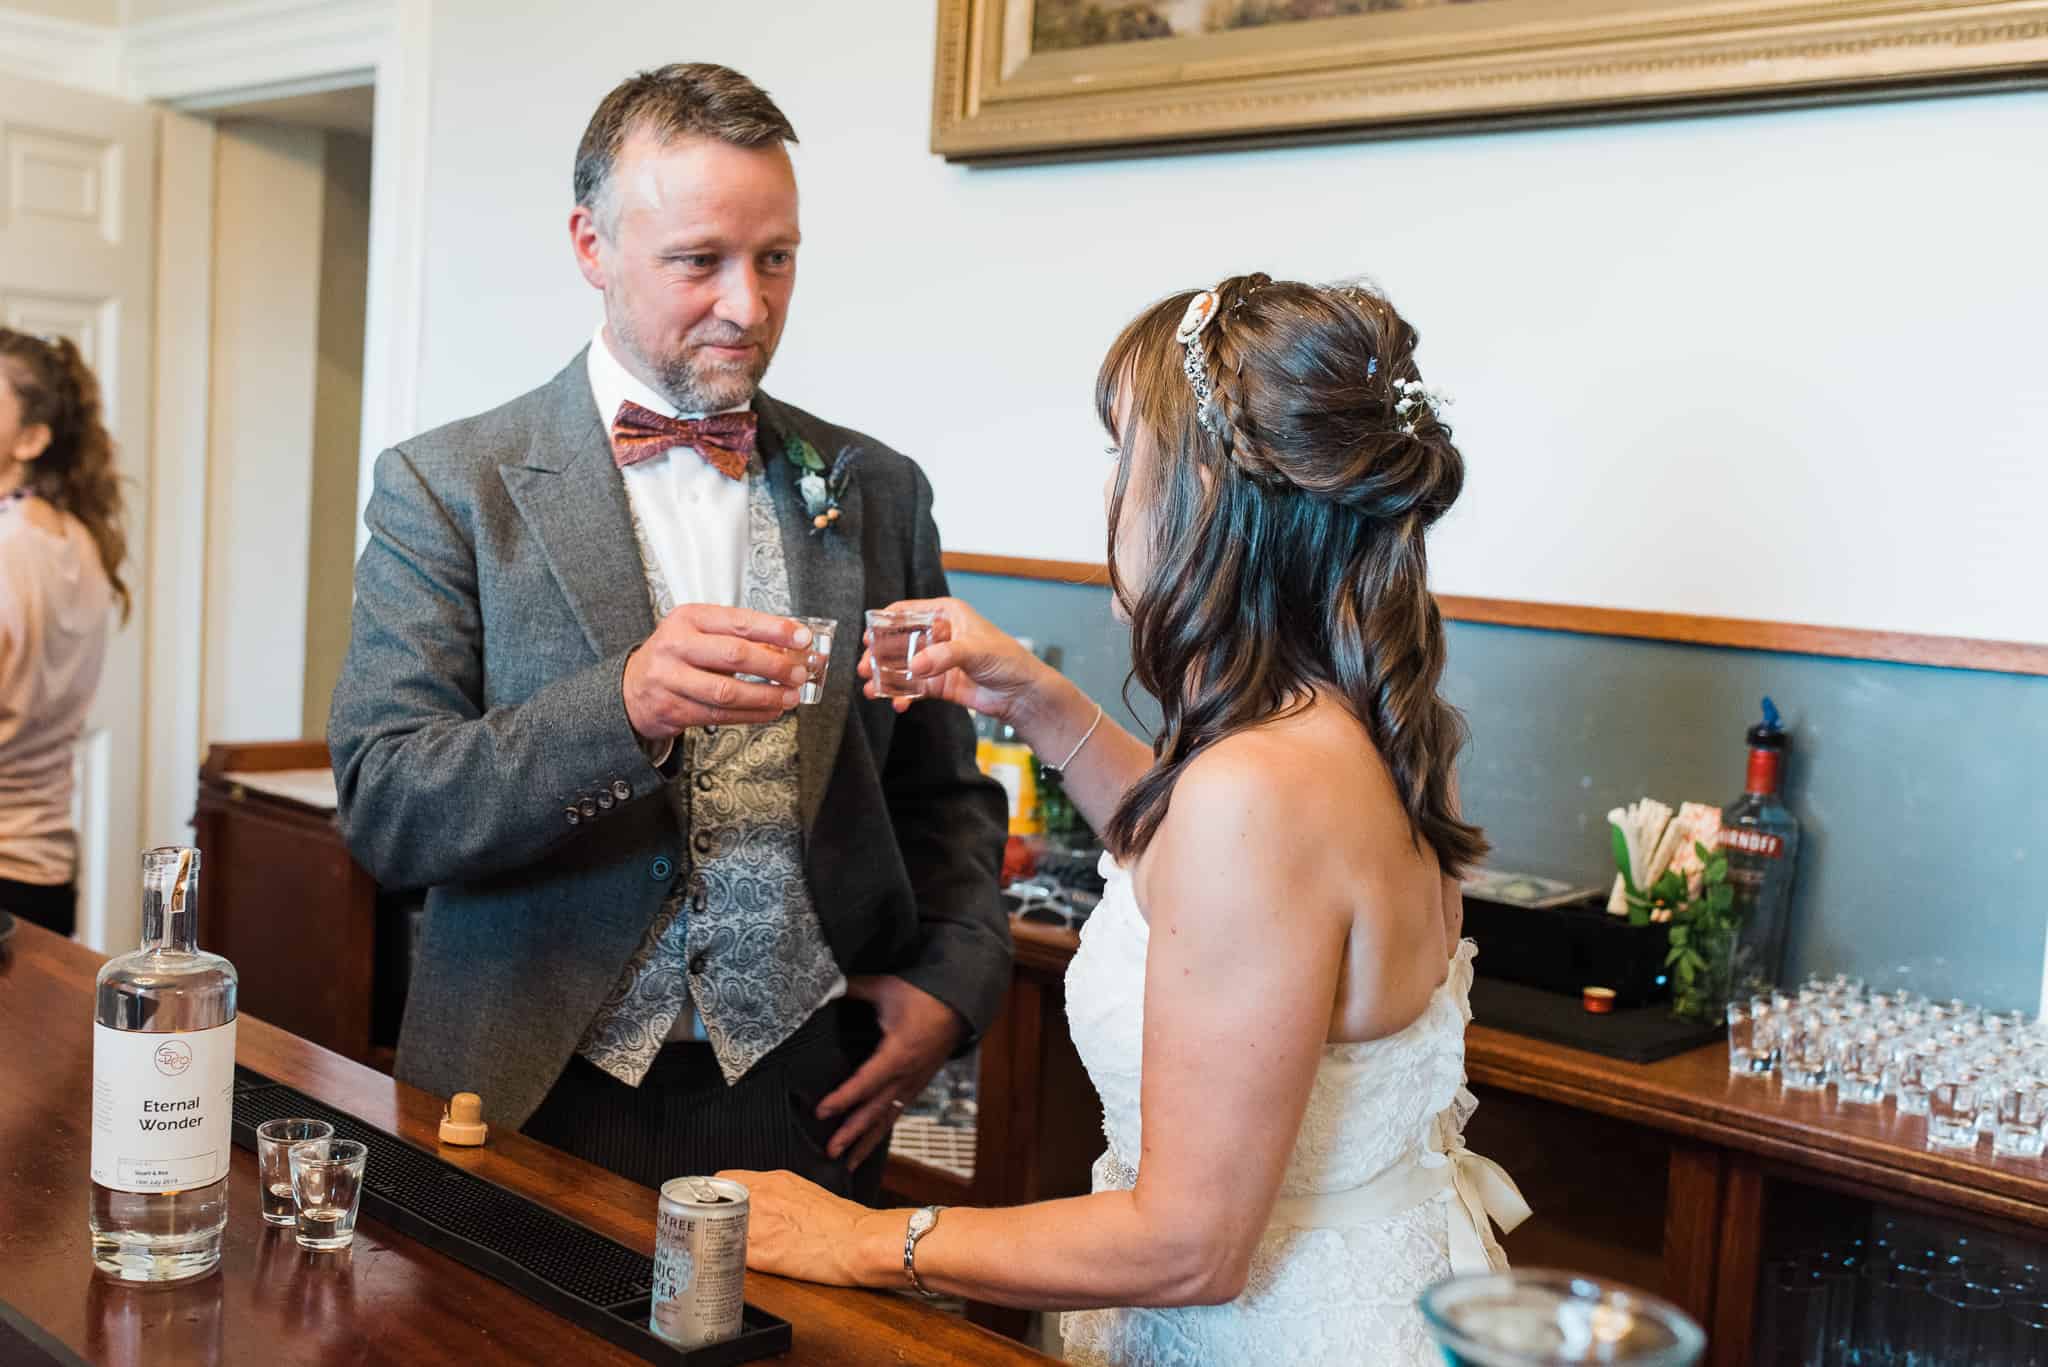 Bride and groom do a shot to get the party started